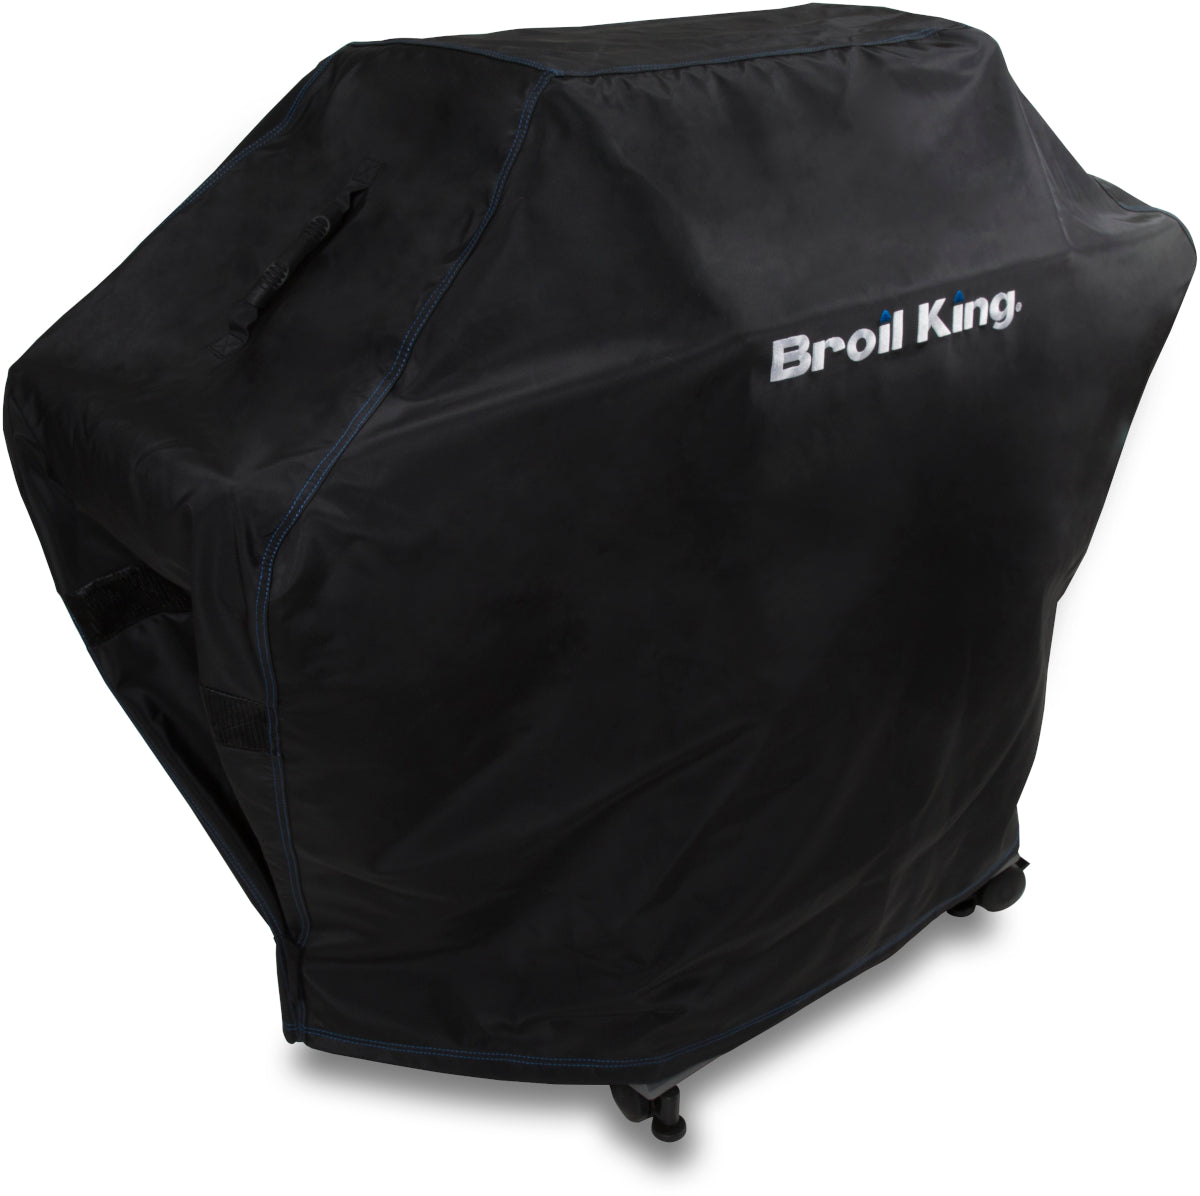 Broil King Premium Cover - Fits the Imperial XL/XLS, Regal S 690IR & Pro